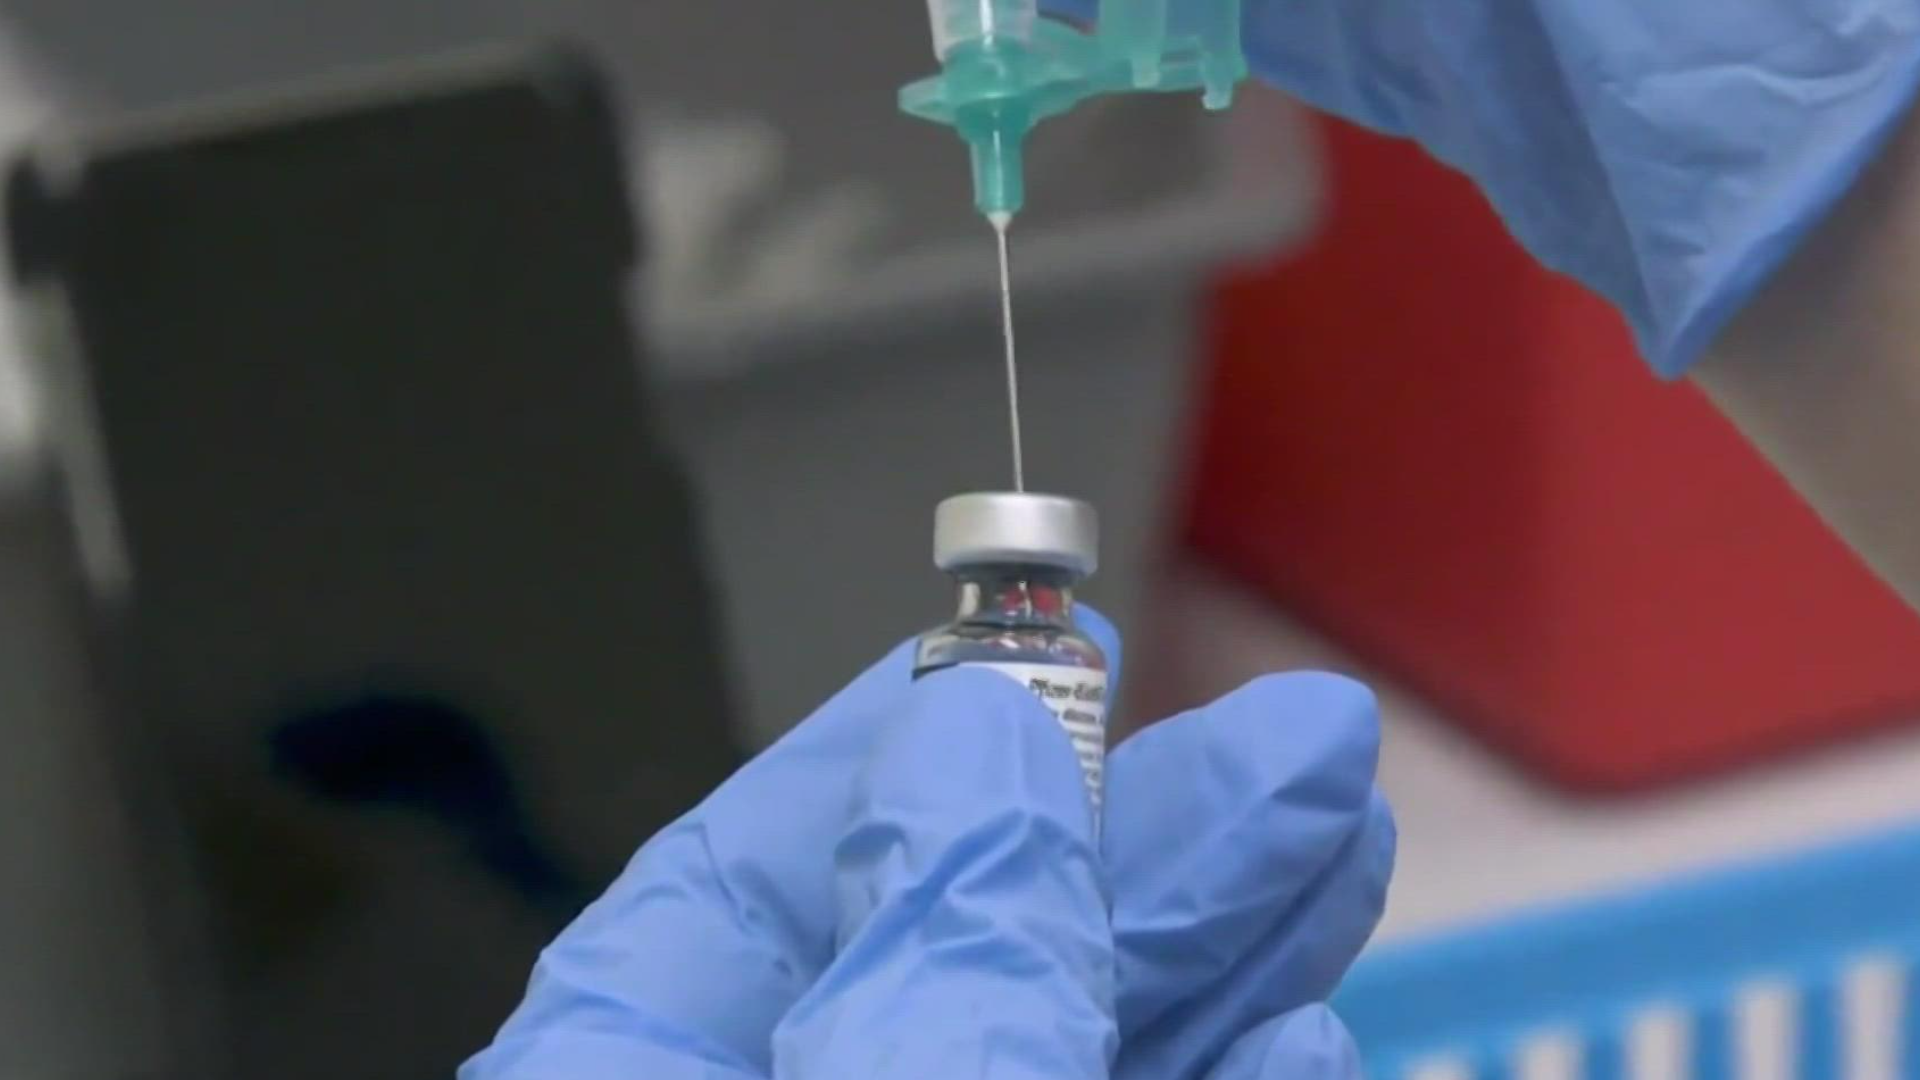 Virginia Beach Public Health says it is waiting for full approval for the third vaccine dose after the FDA advisory panel recommended it for people 65 or older.